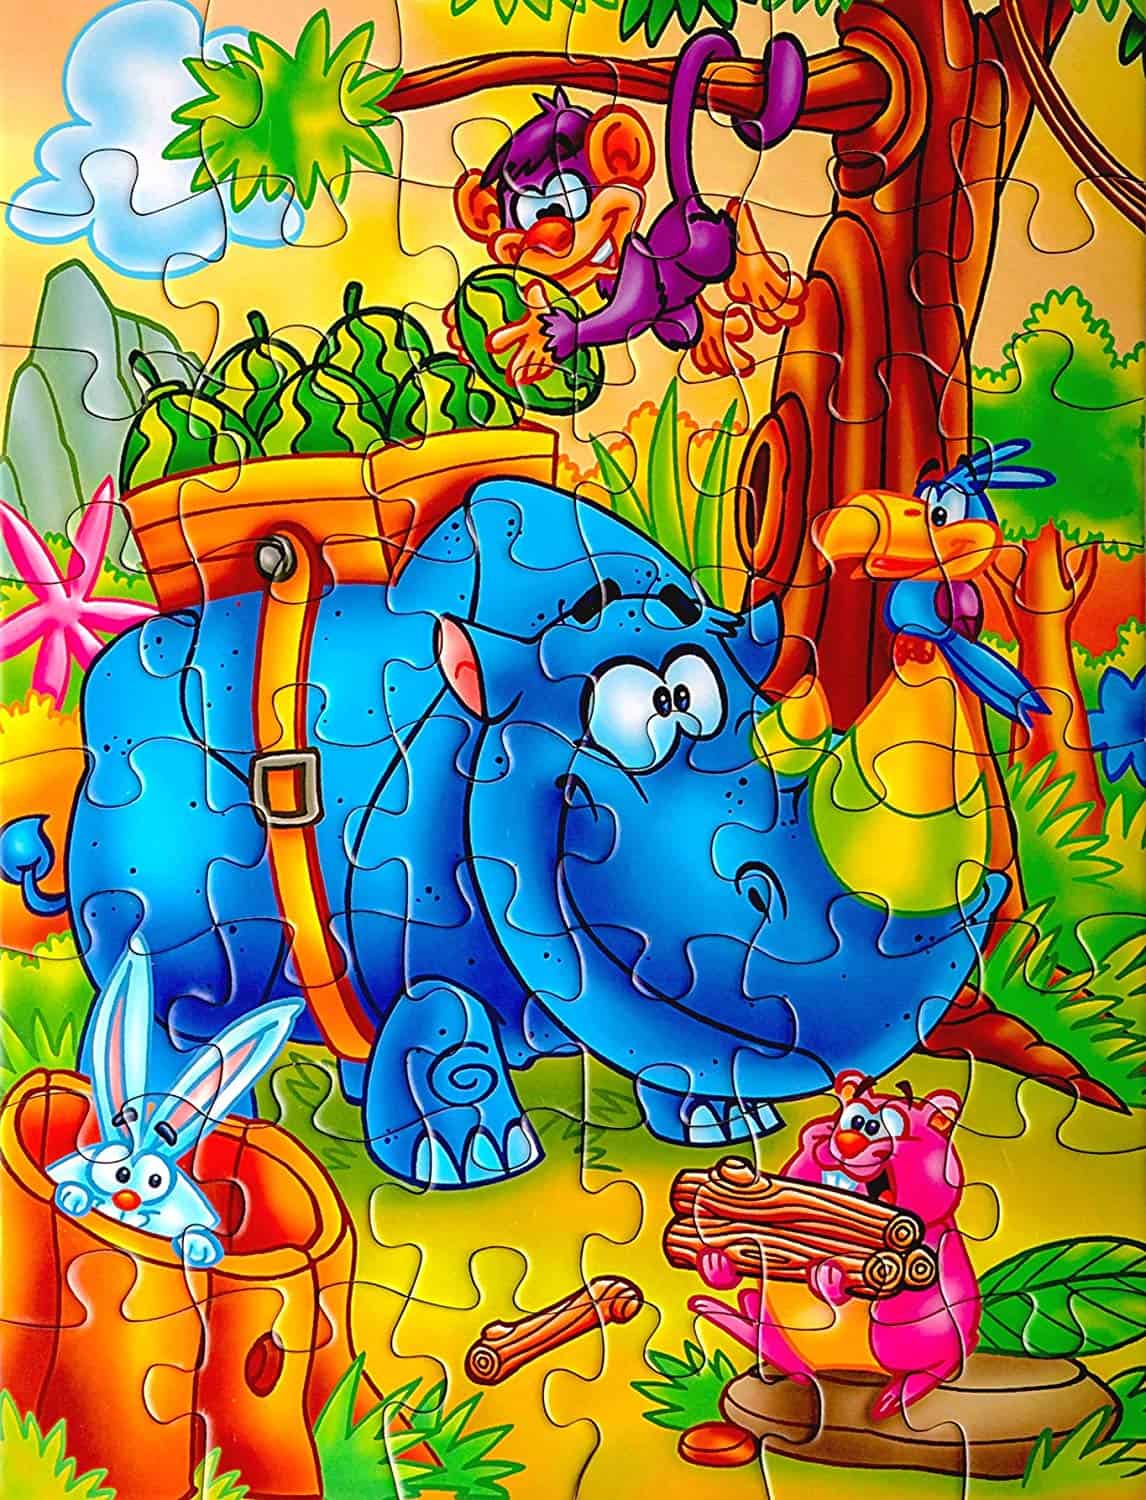 Best Jigsaw Puzzles for Kids 2020 - LittleOneMag